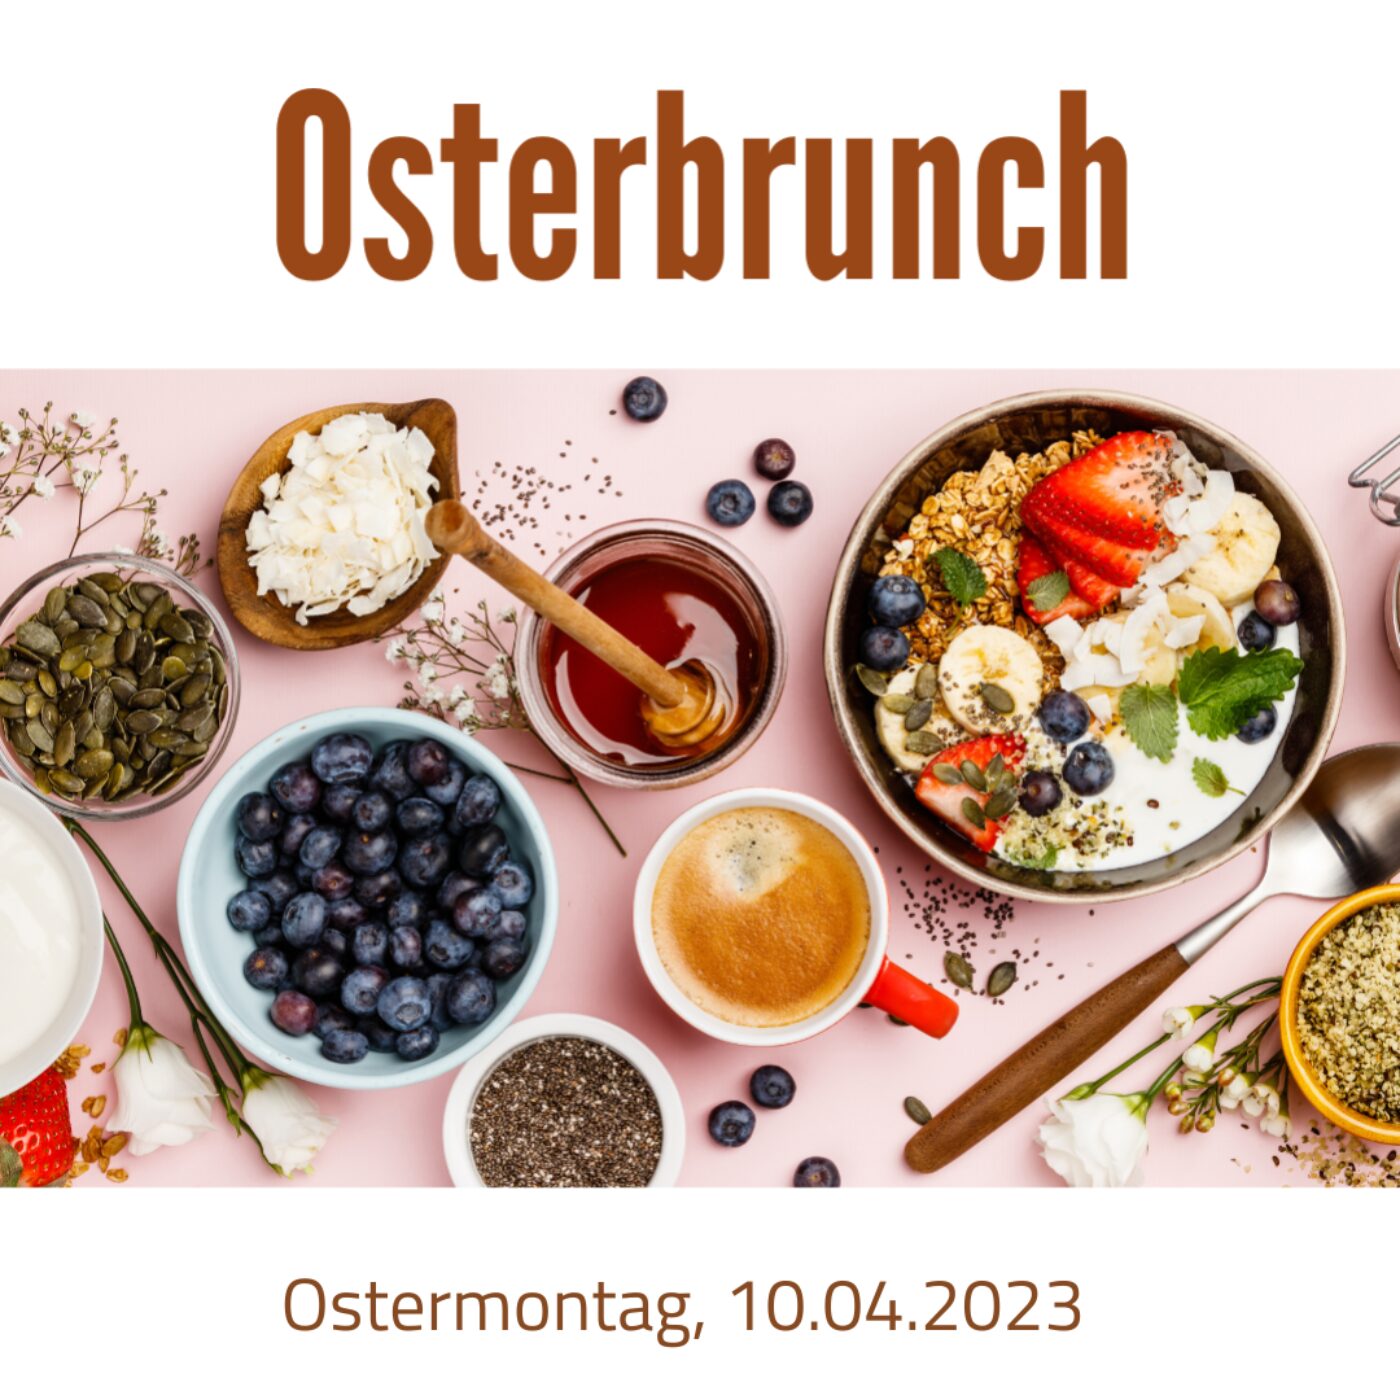 Osterbrunch am Ostermontag"